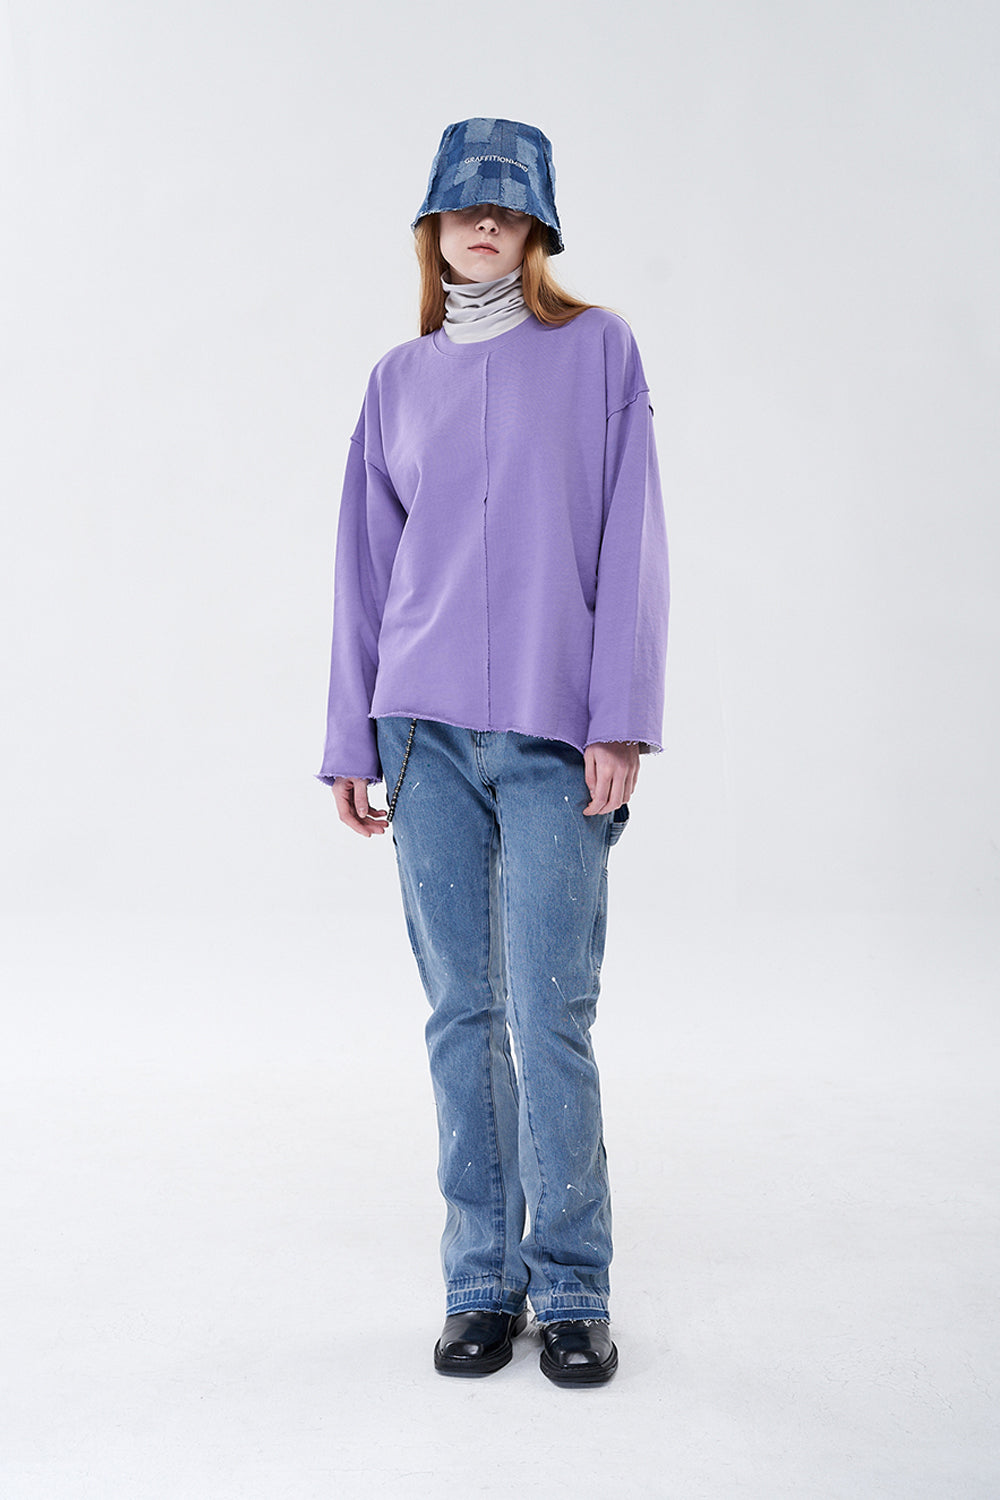 GRAFFITIONMIND  Incision Long Sleeve Tee / PURPLE